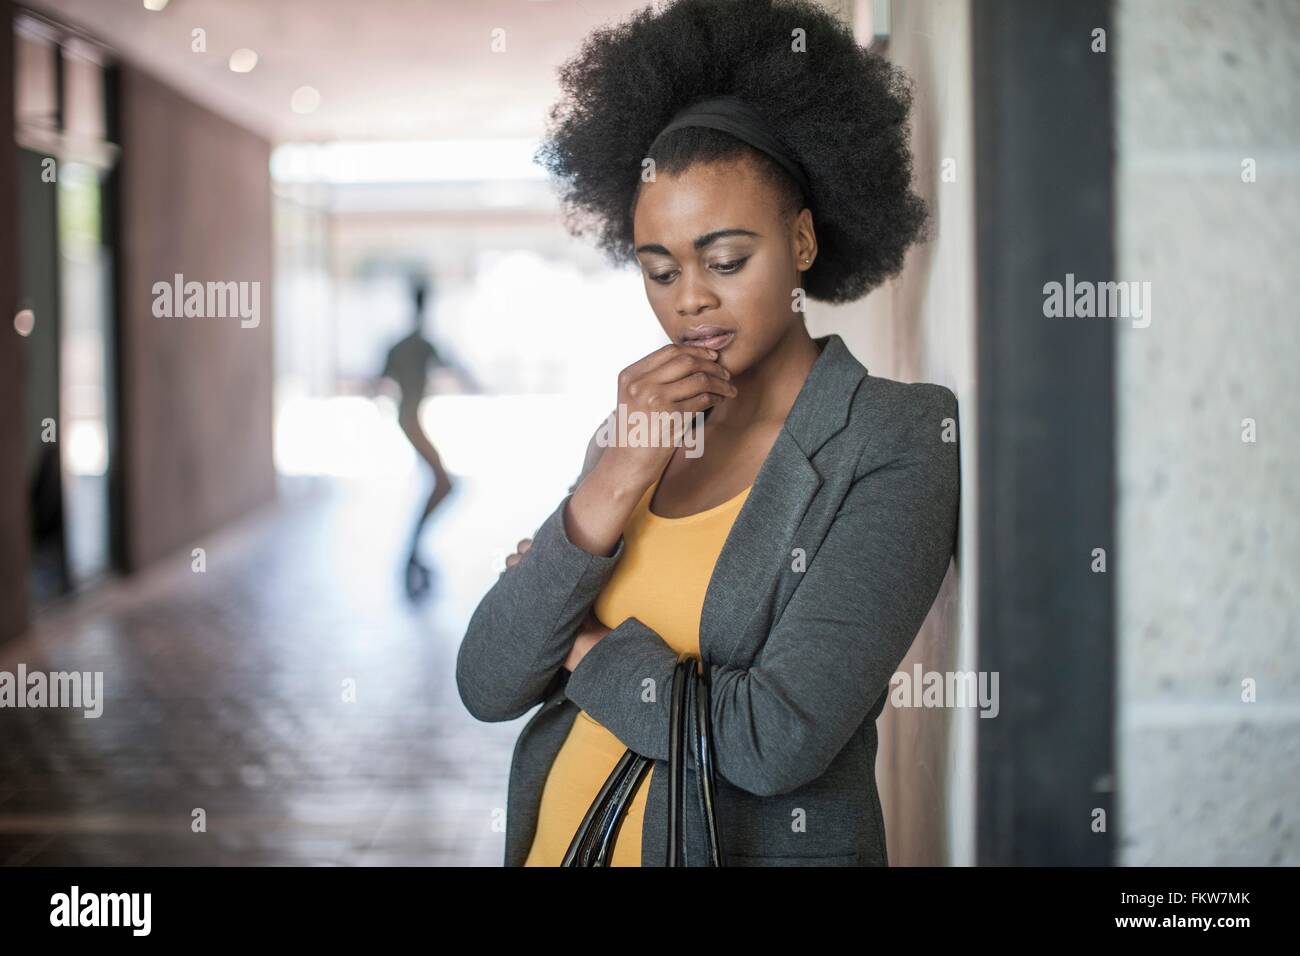 Young businesswomen with hand on chin leaning against office wall Stock Photo